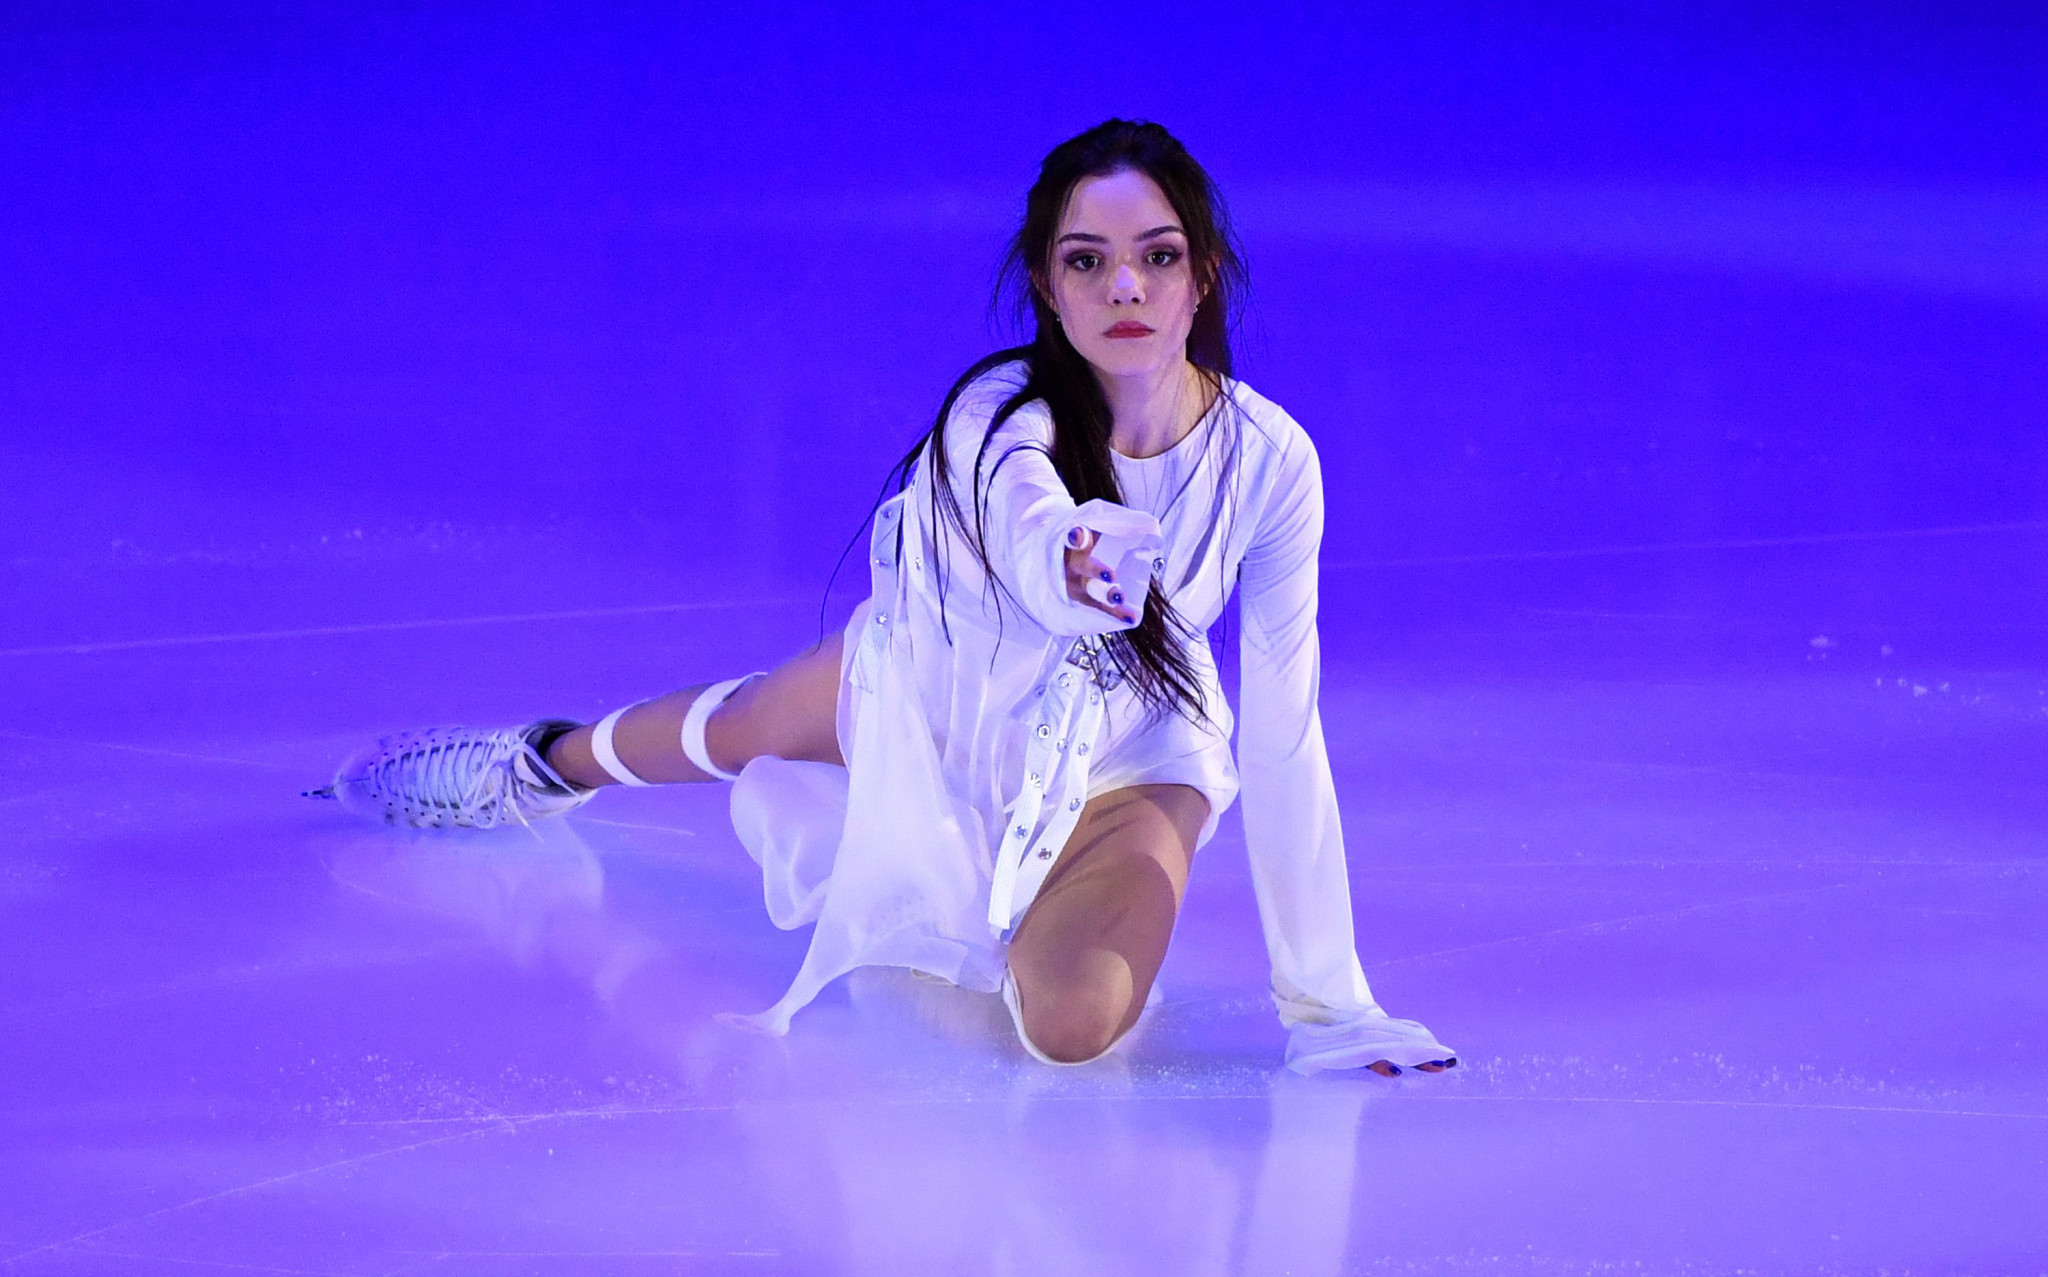 Evgenia Medvedeva could also miss Beijing 2022 after injuries stopped her making the national team ©Getty Images